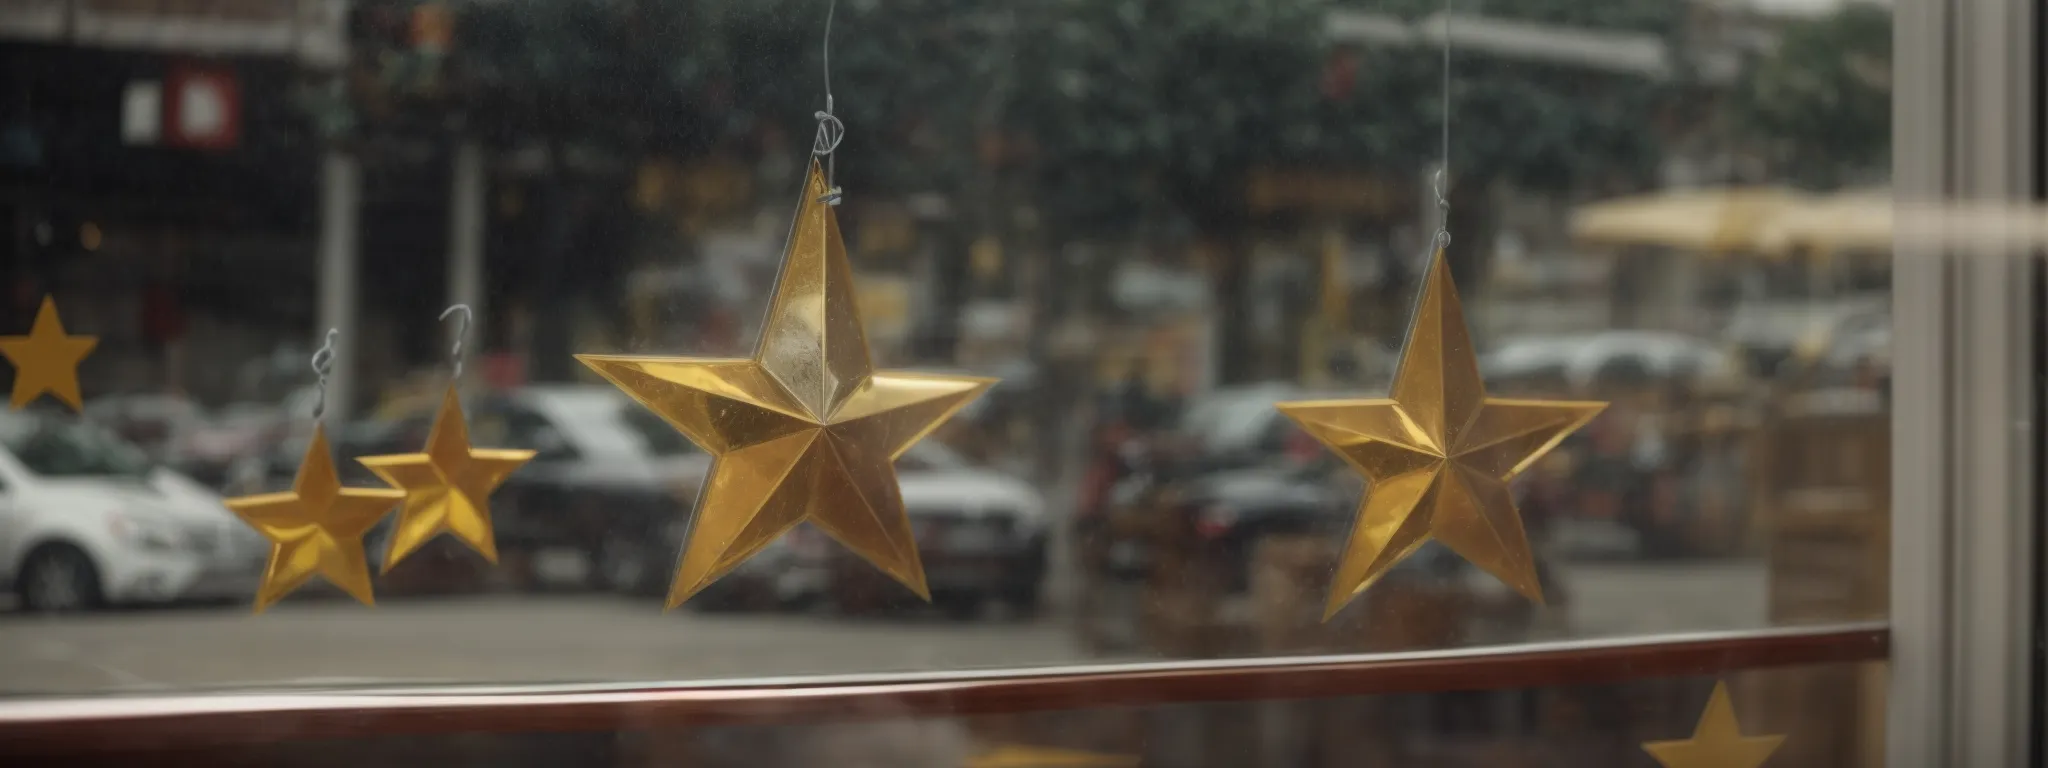 a five-star rating symbol visible on a storefront window to signify high customer satisfaction.